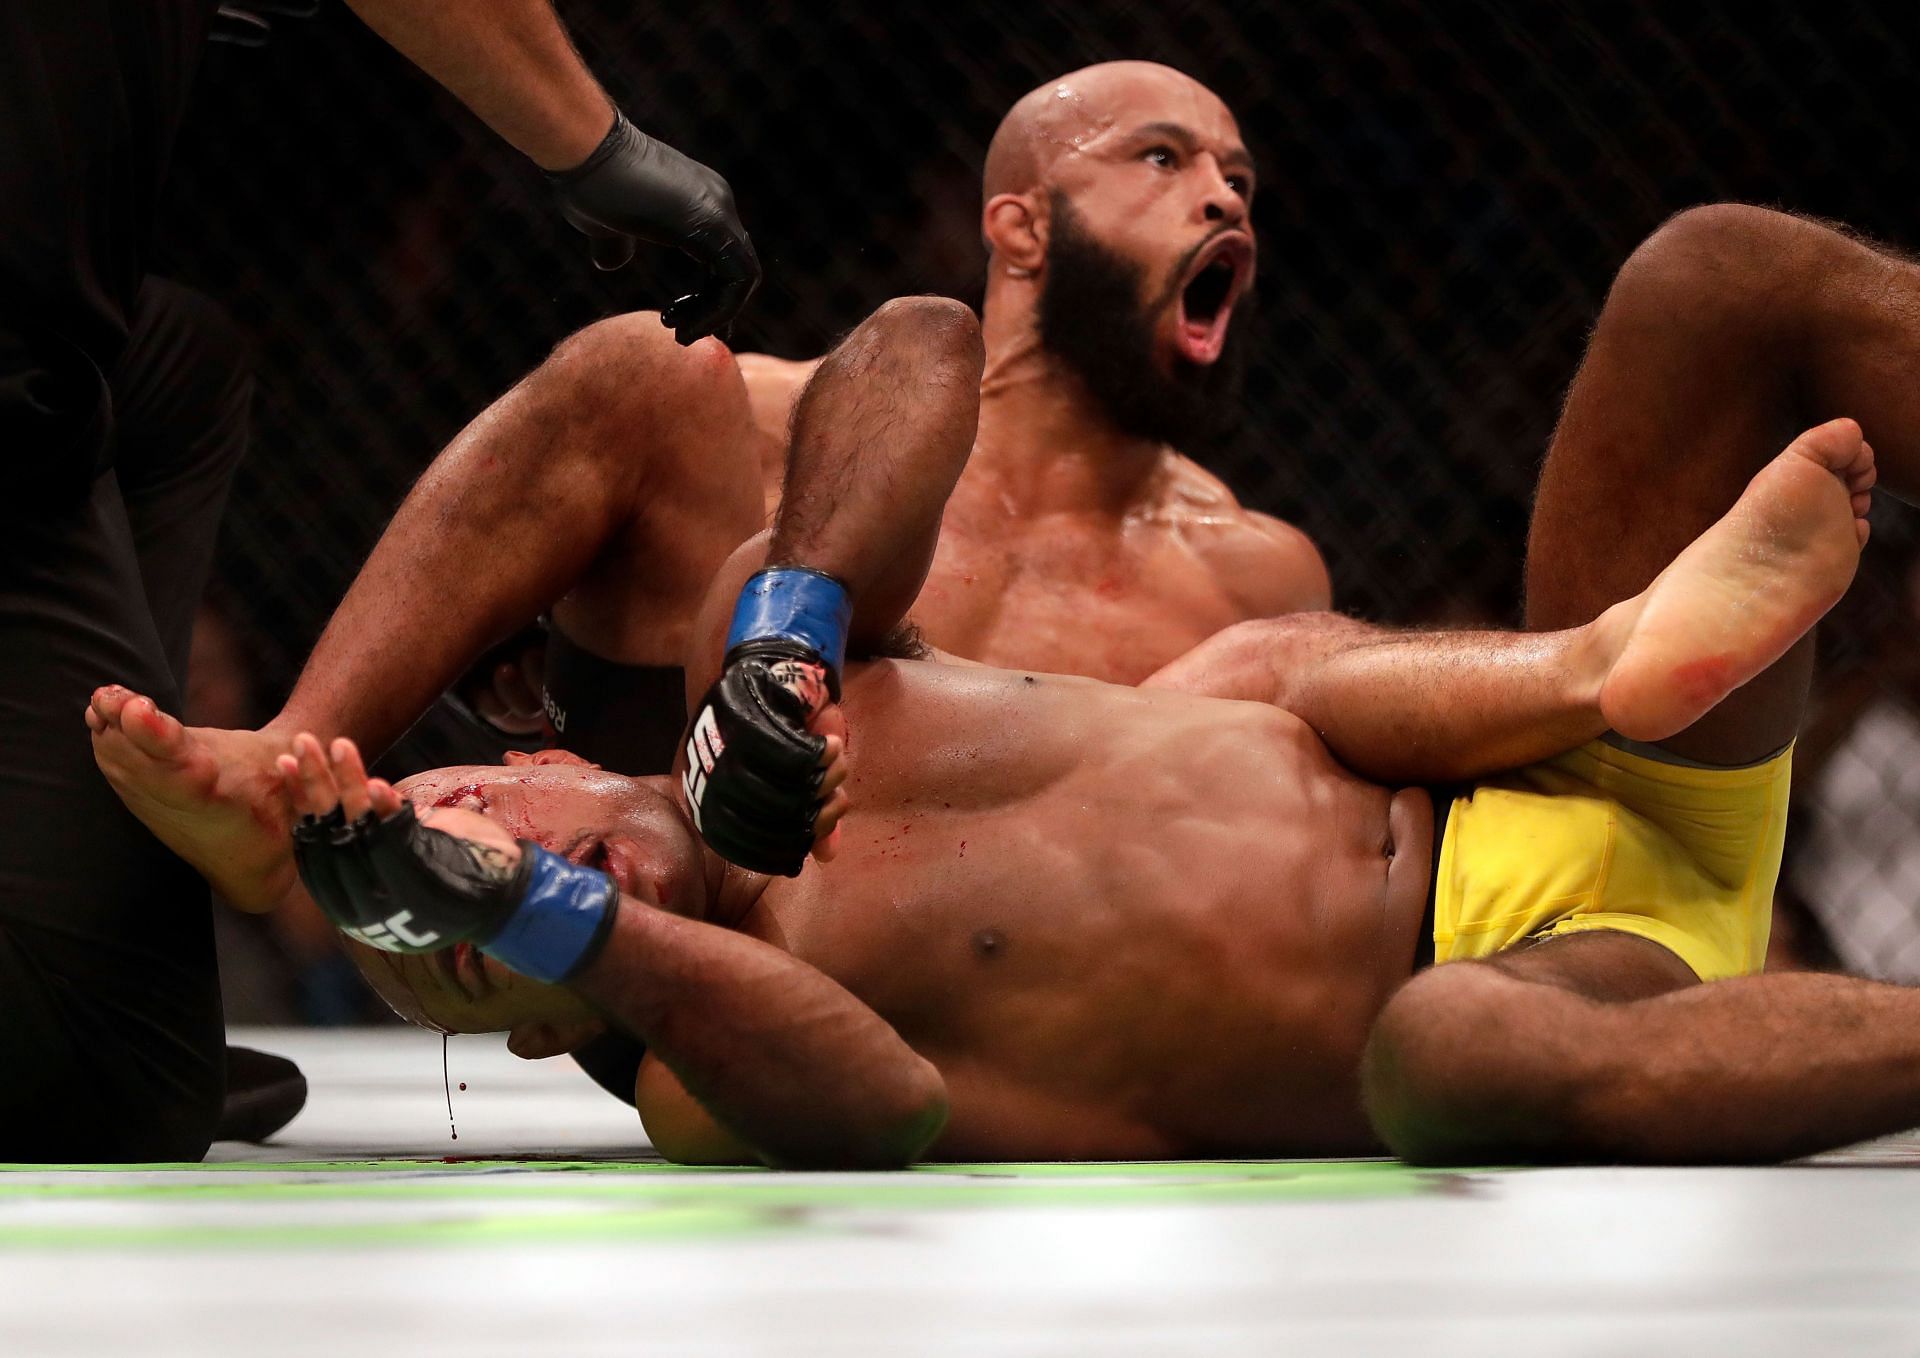 Demetrious Johnson never caught on with the fans despite having all the tools to do so